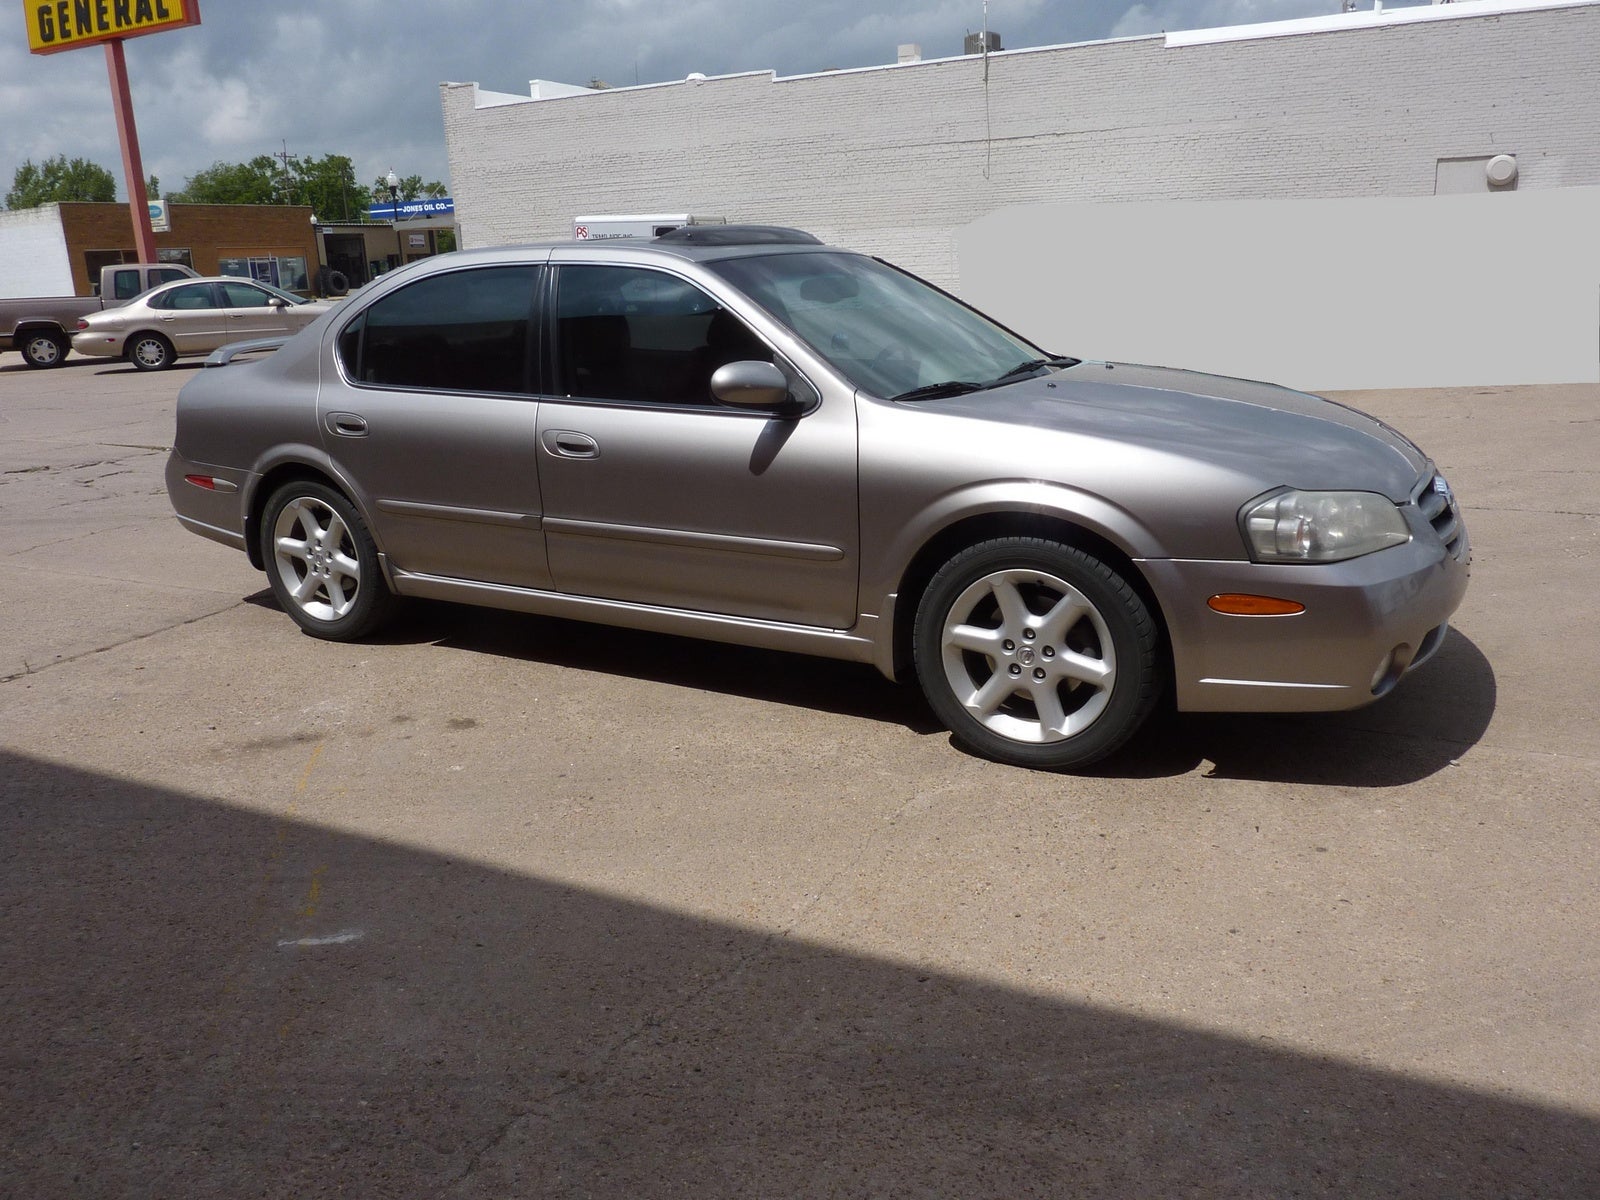 Is a 2002 nissan maxima reliable #10